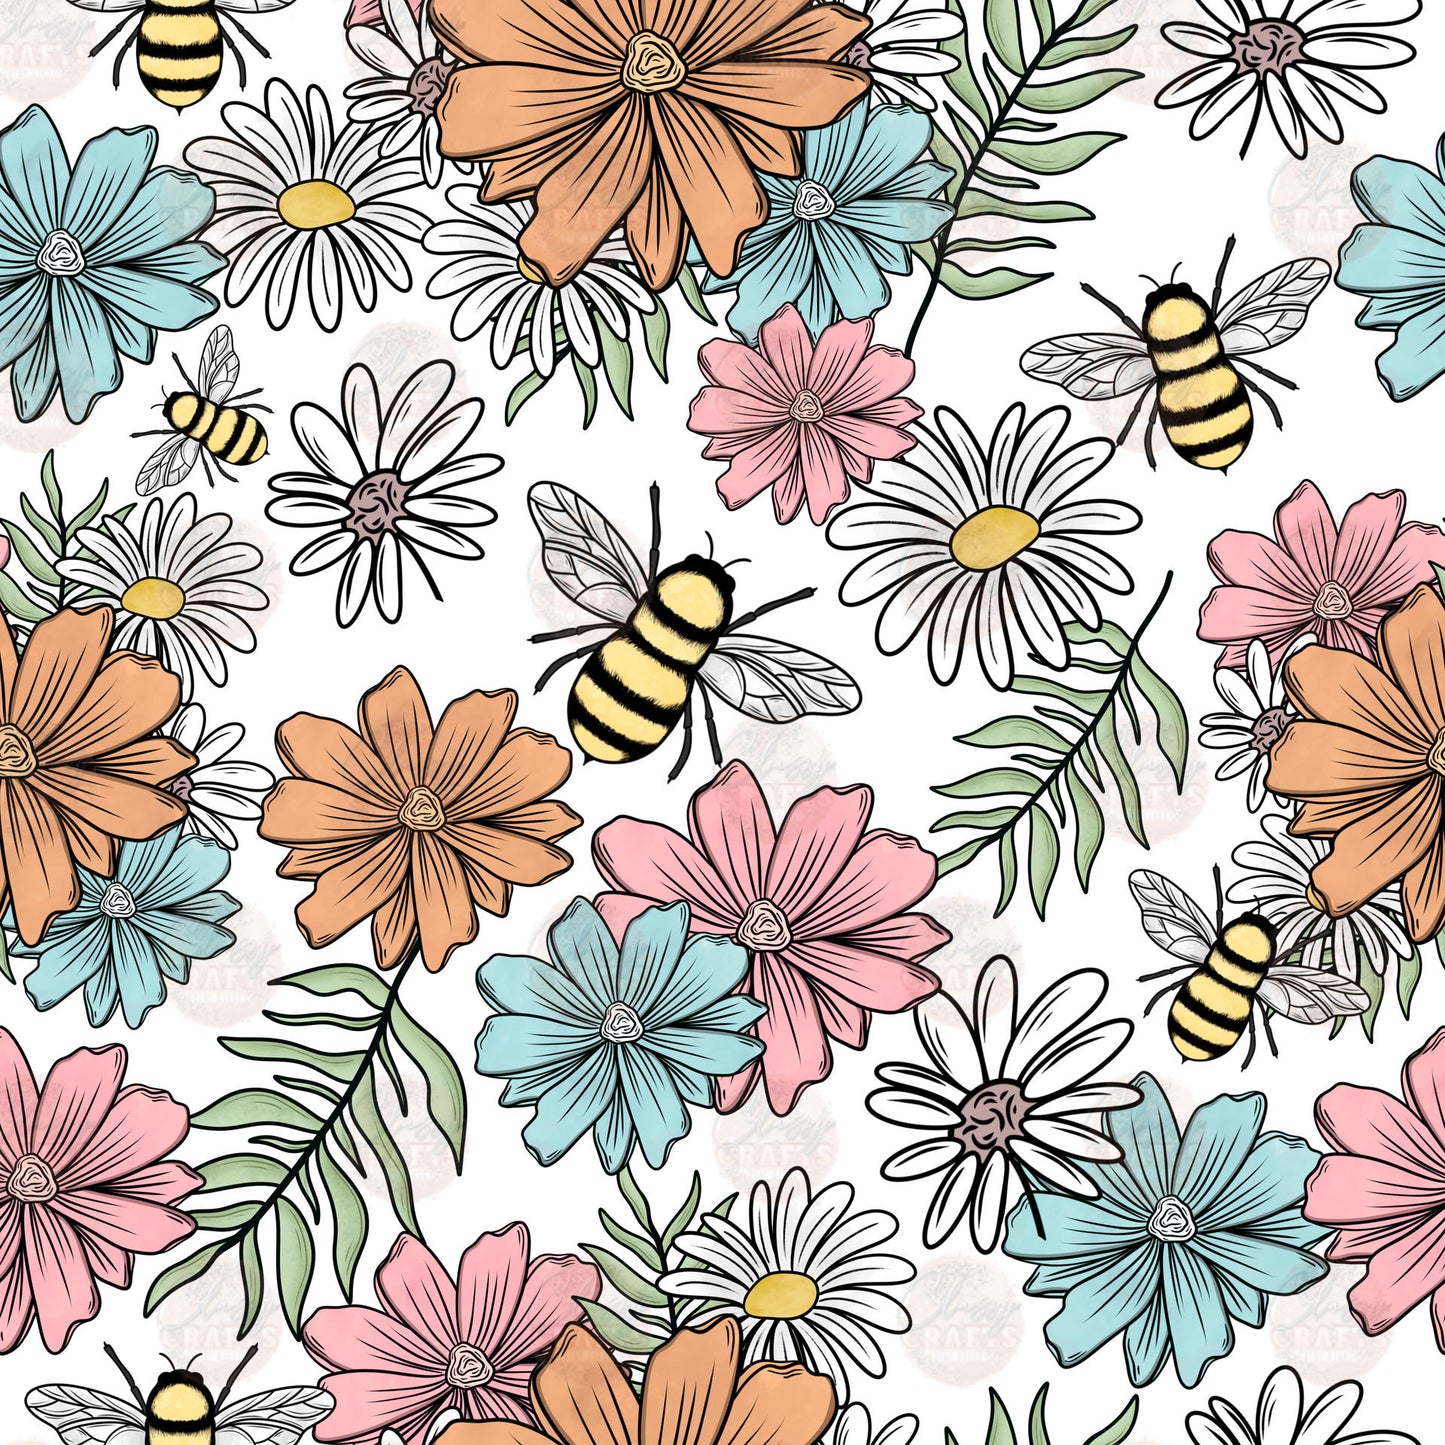 Floral Bees Seamless Wrap - Sublimation Transfer